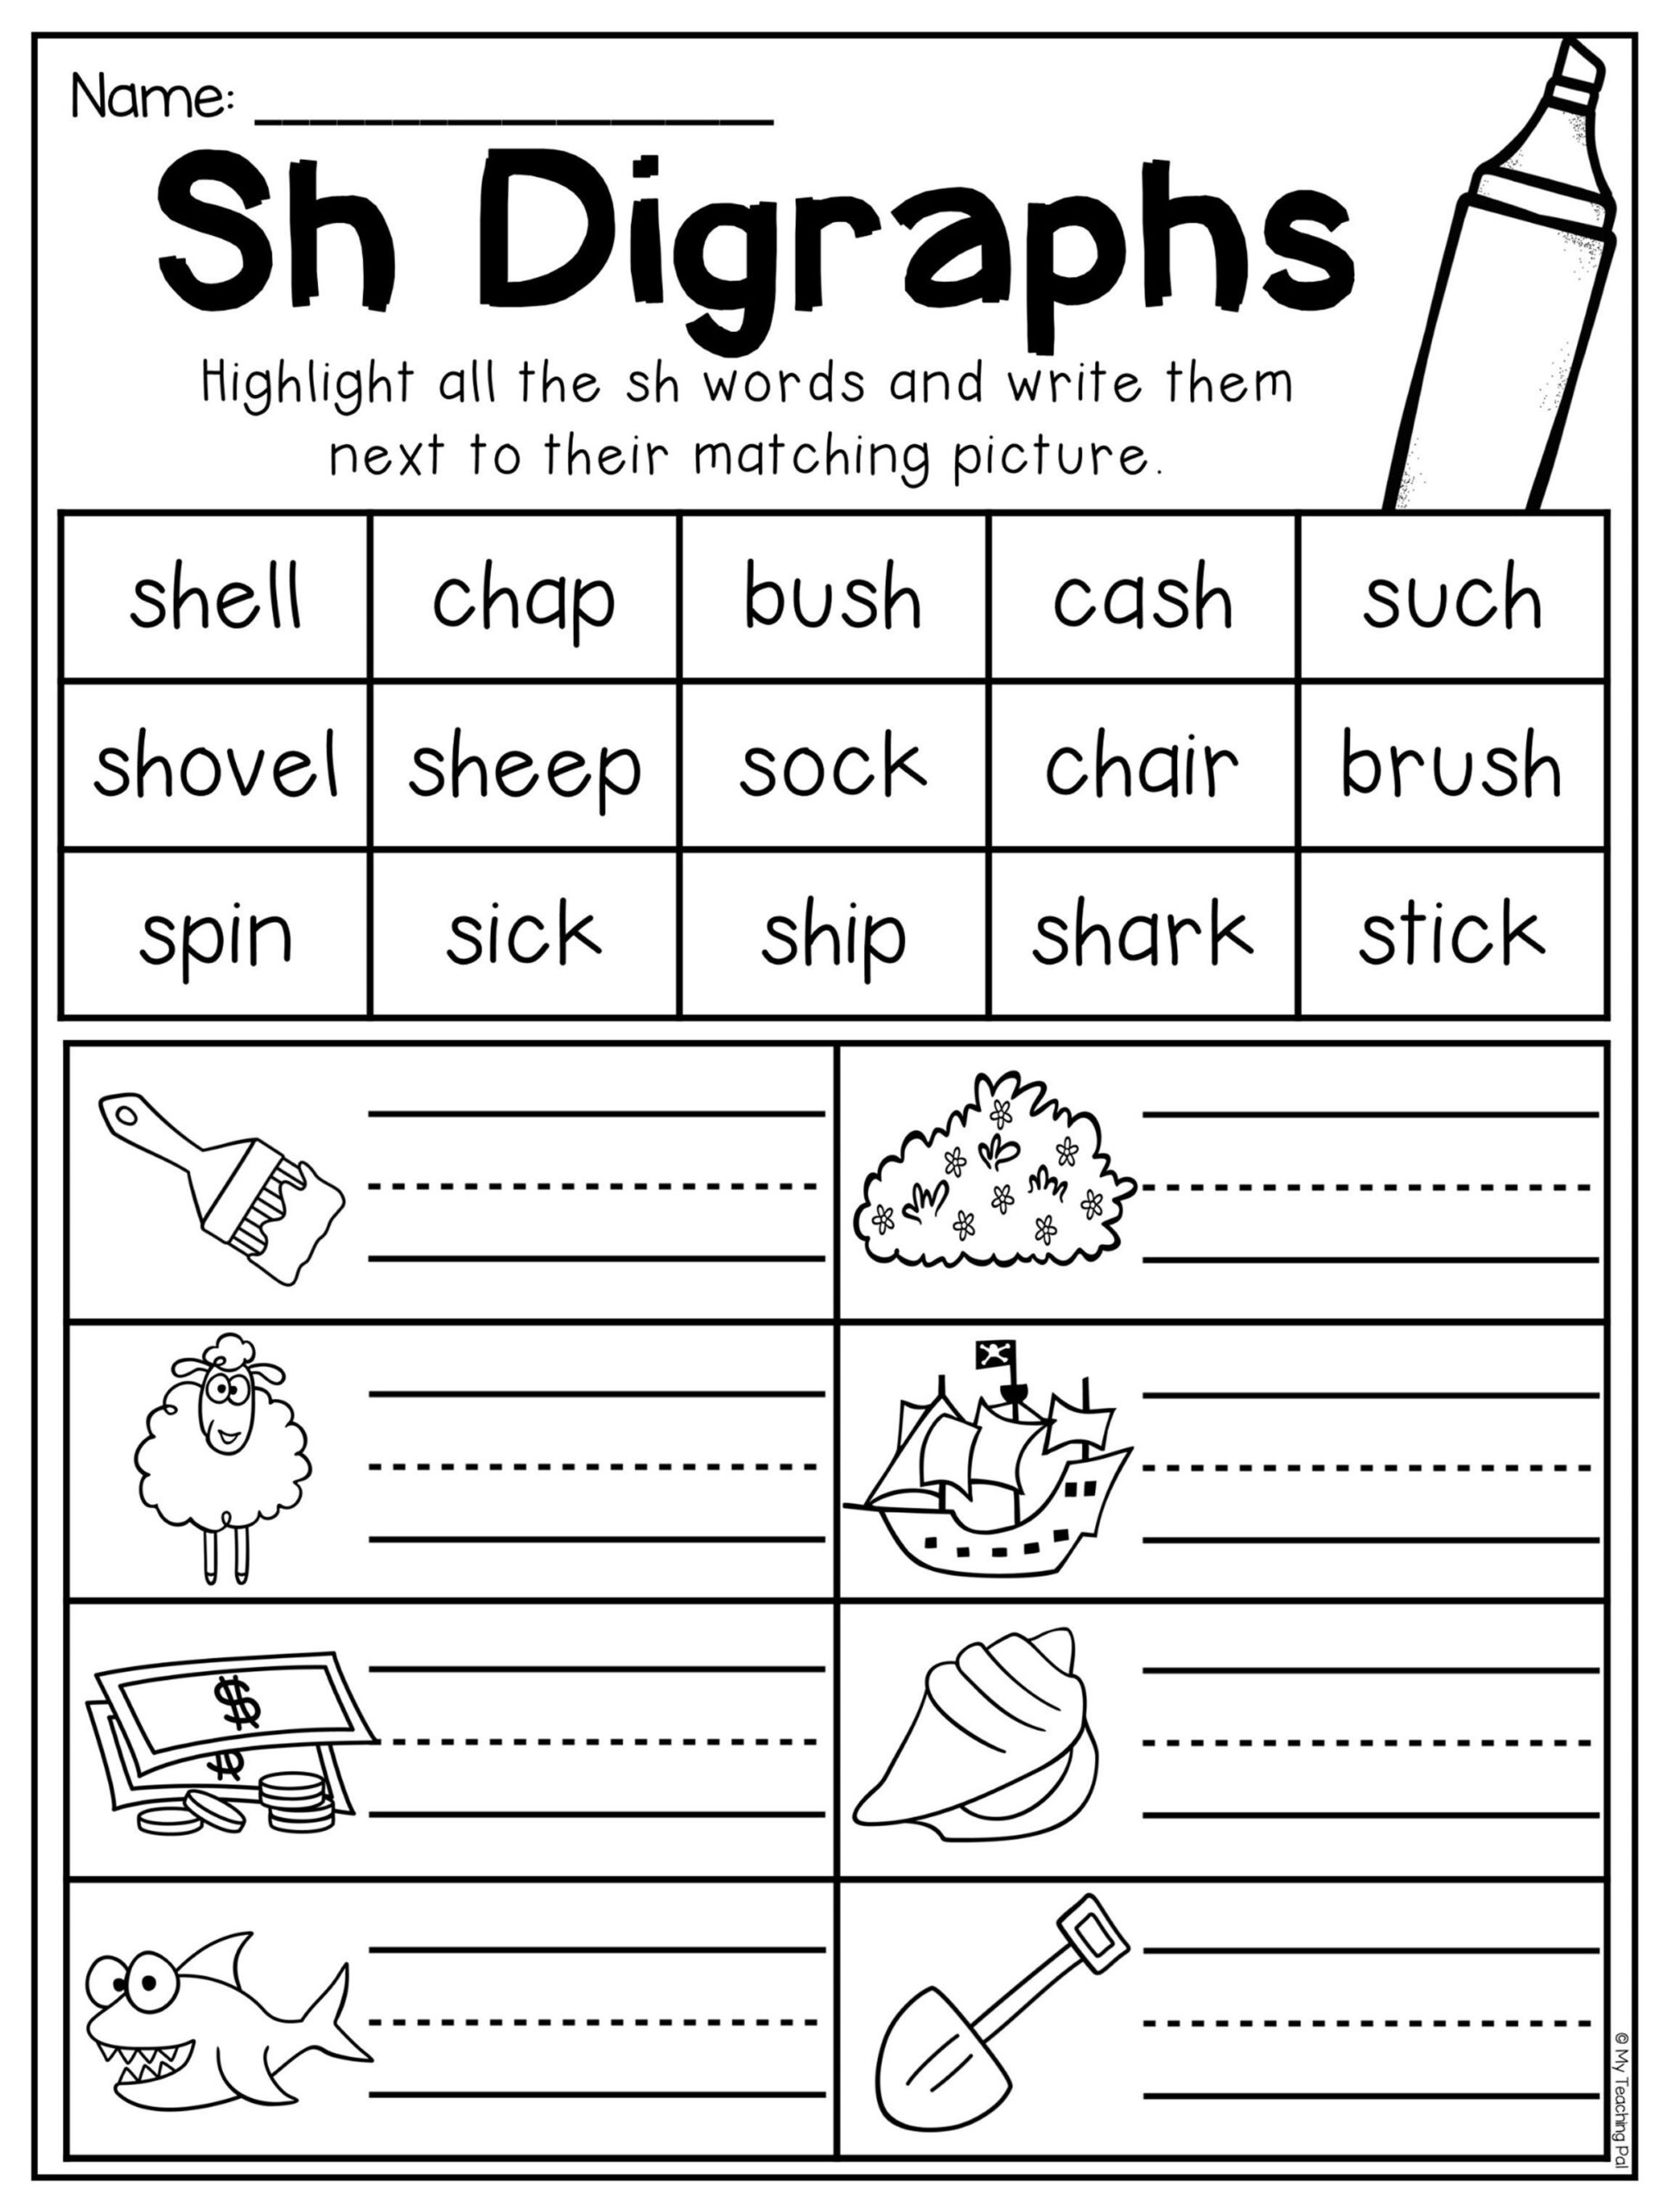 Digraph Worksheet Packet Ch Sh Th Wh Ph Phonics Worksheets 